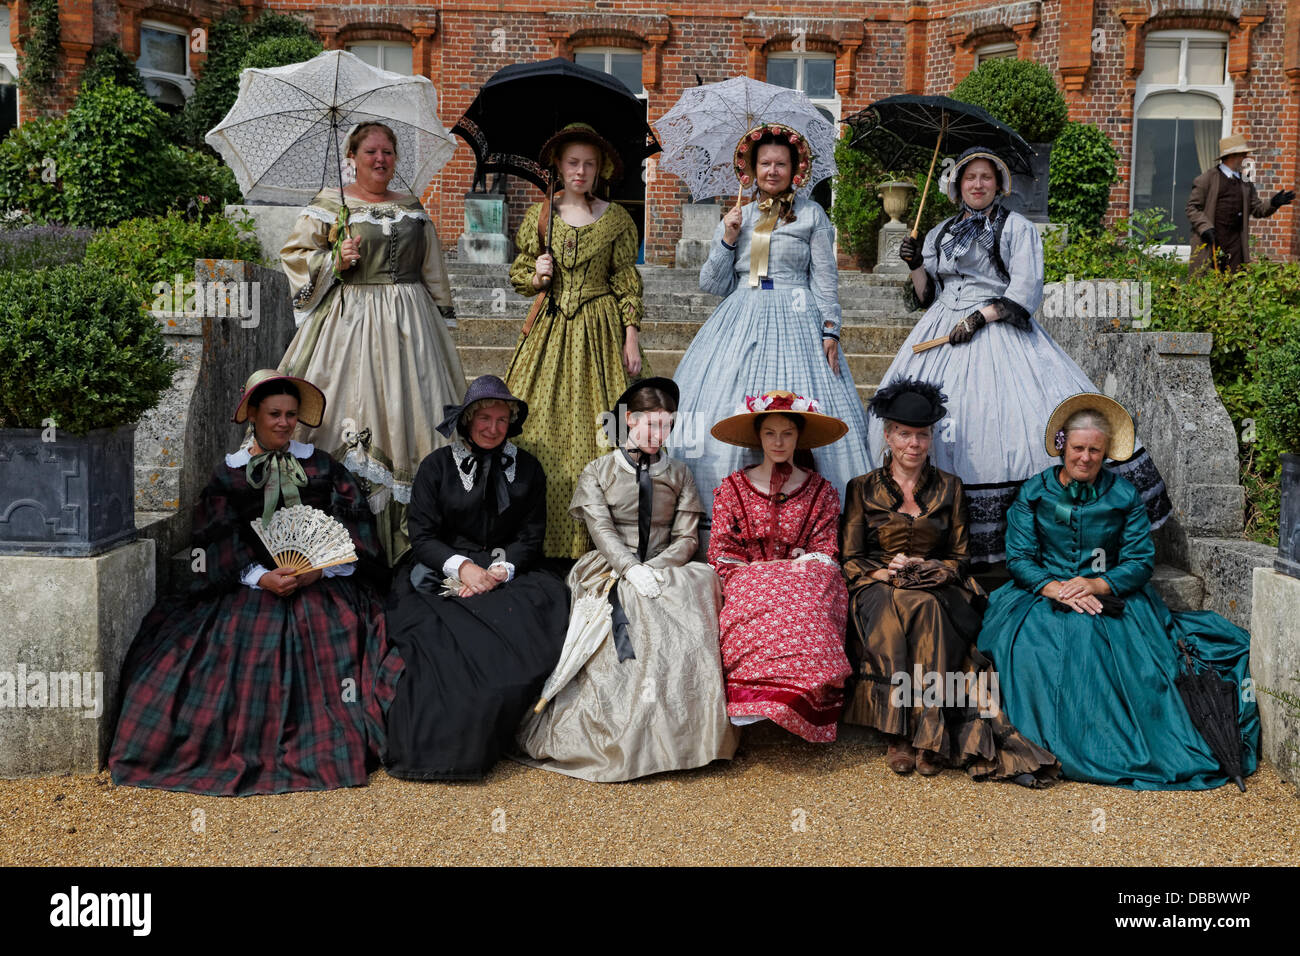 Ladies With Parasols High Resolution Stock Photography and Images - Alamy